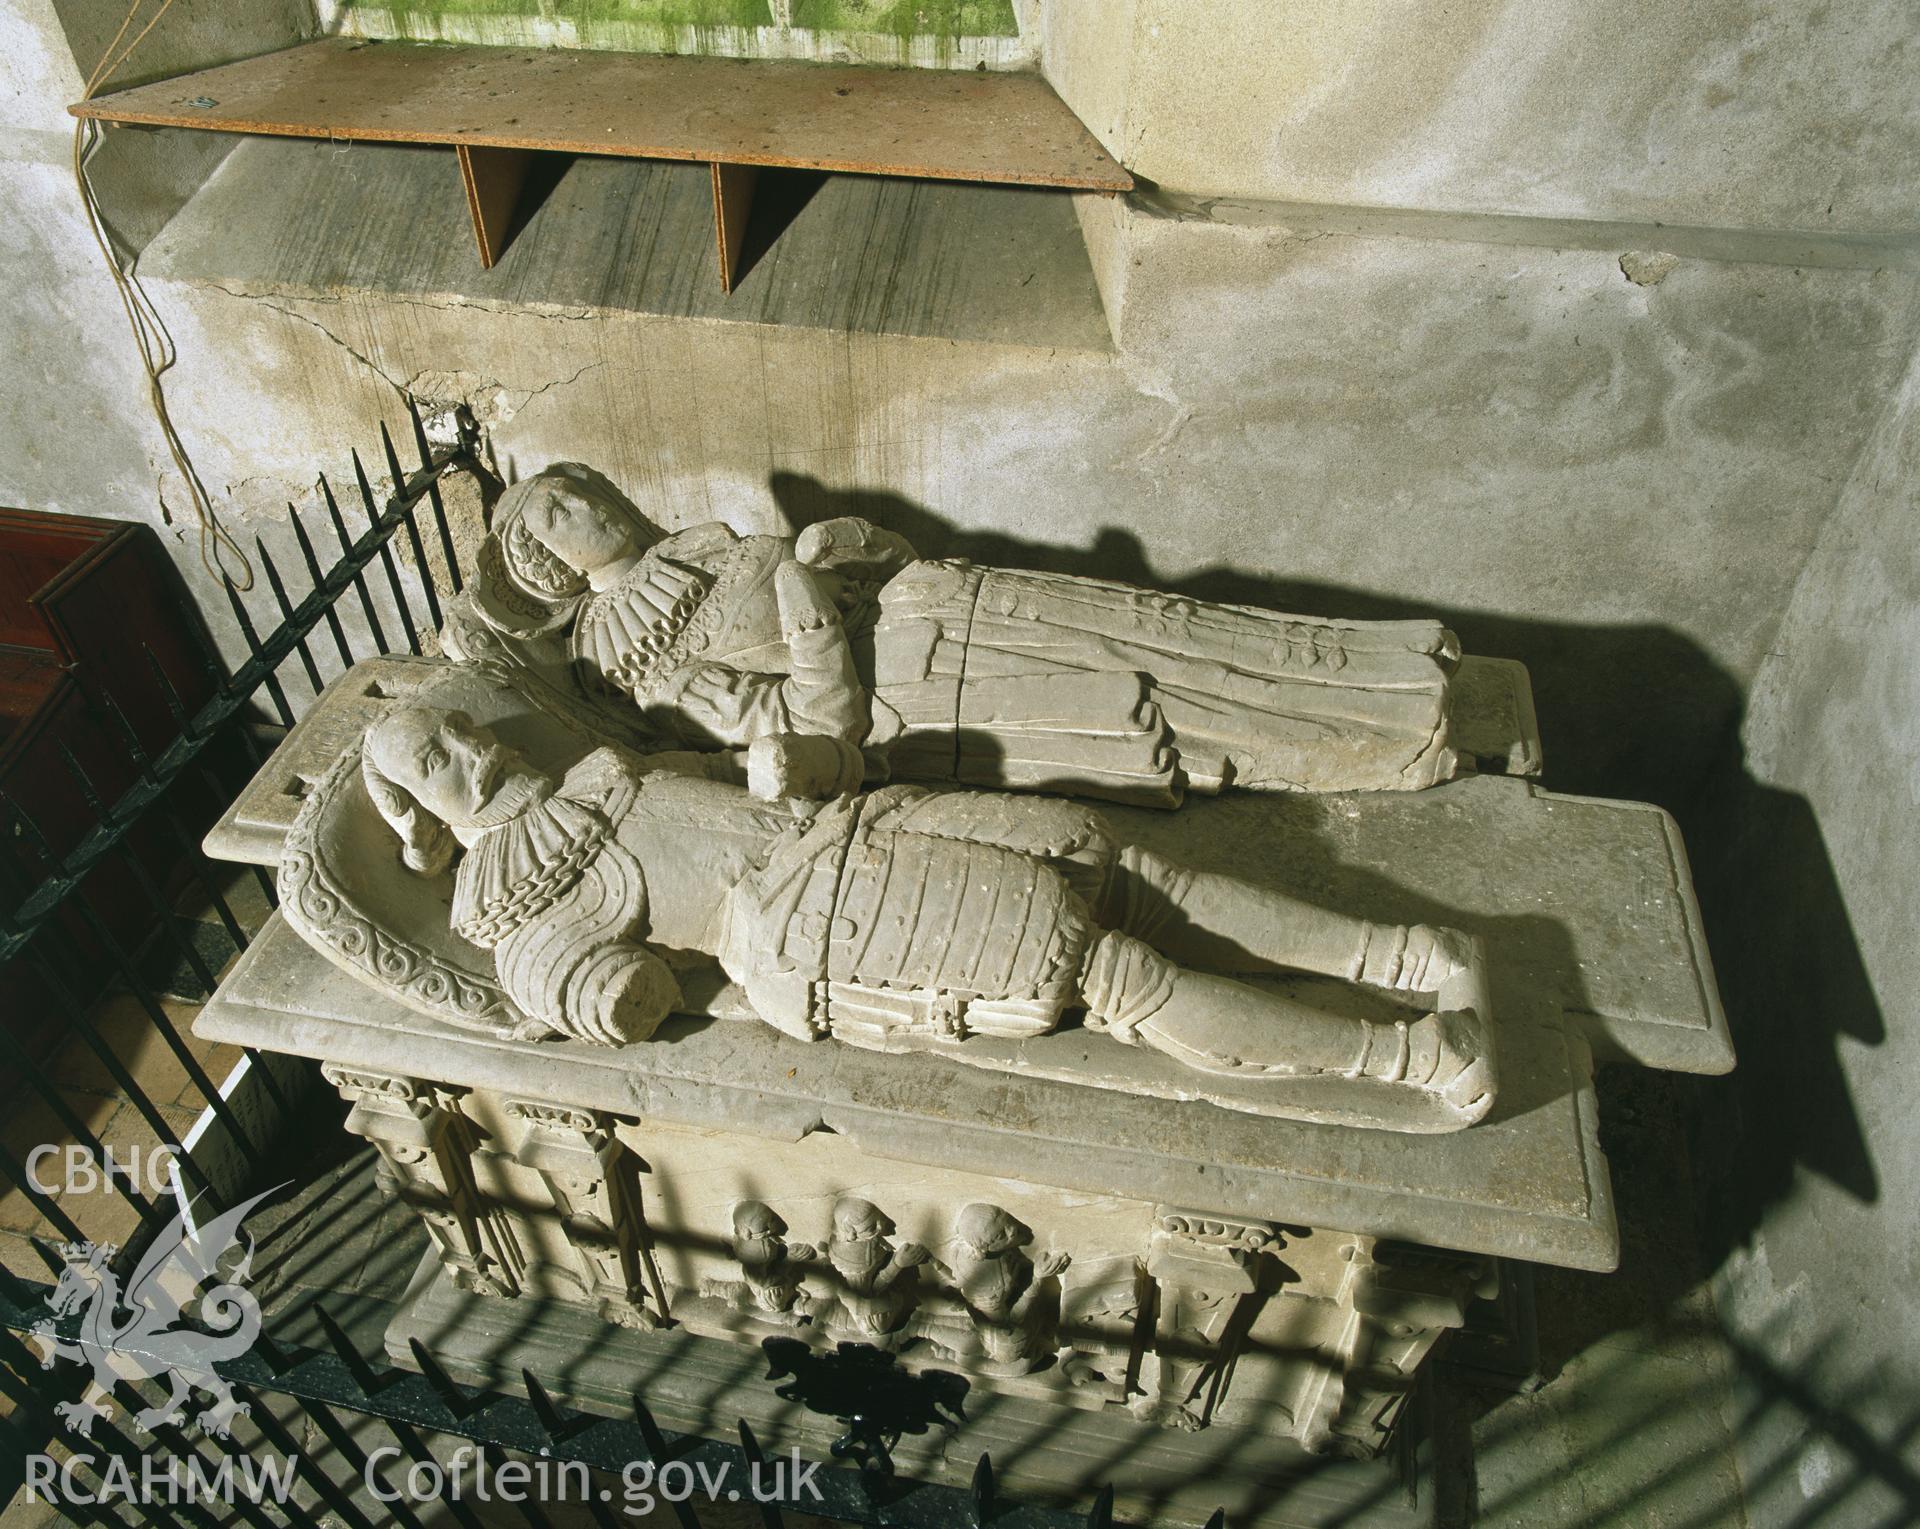 RCAHMW colour transparency showing the tomb of St John Carew in Carew Church, taken by I.N. Wright, 2003.